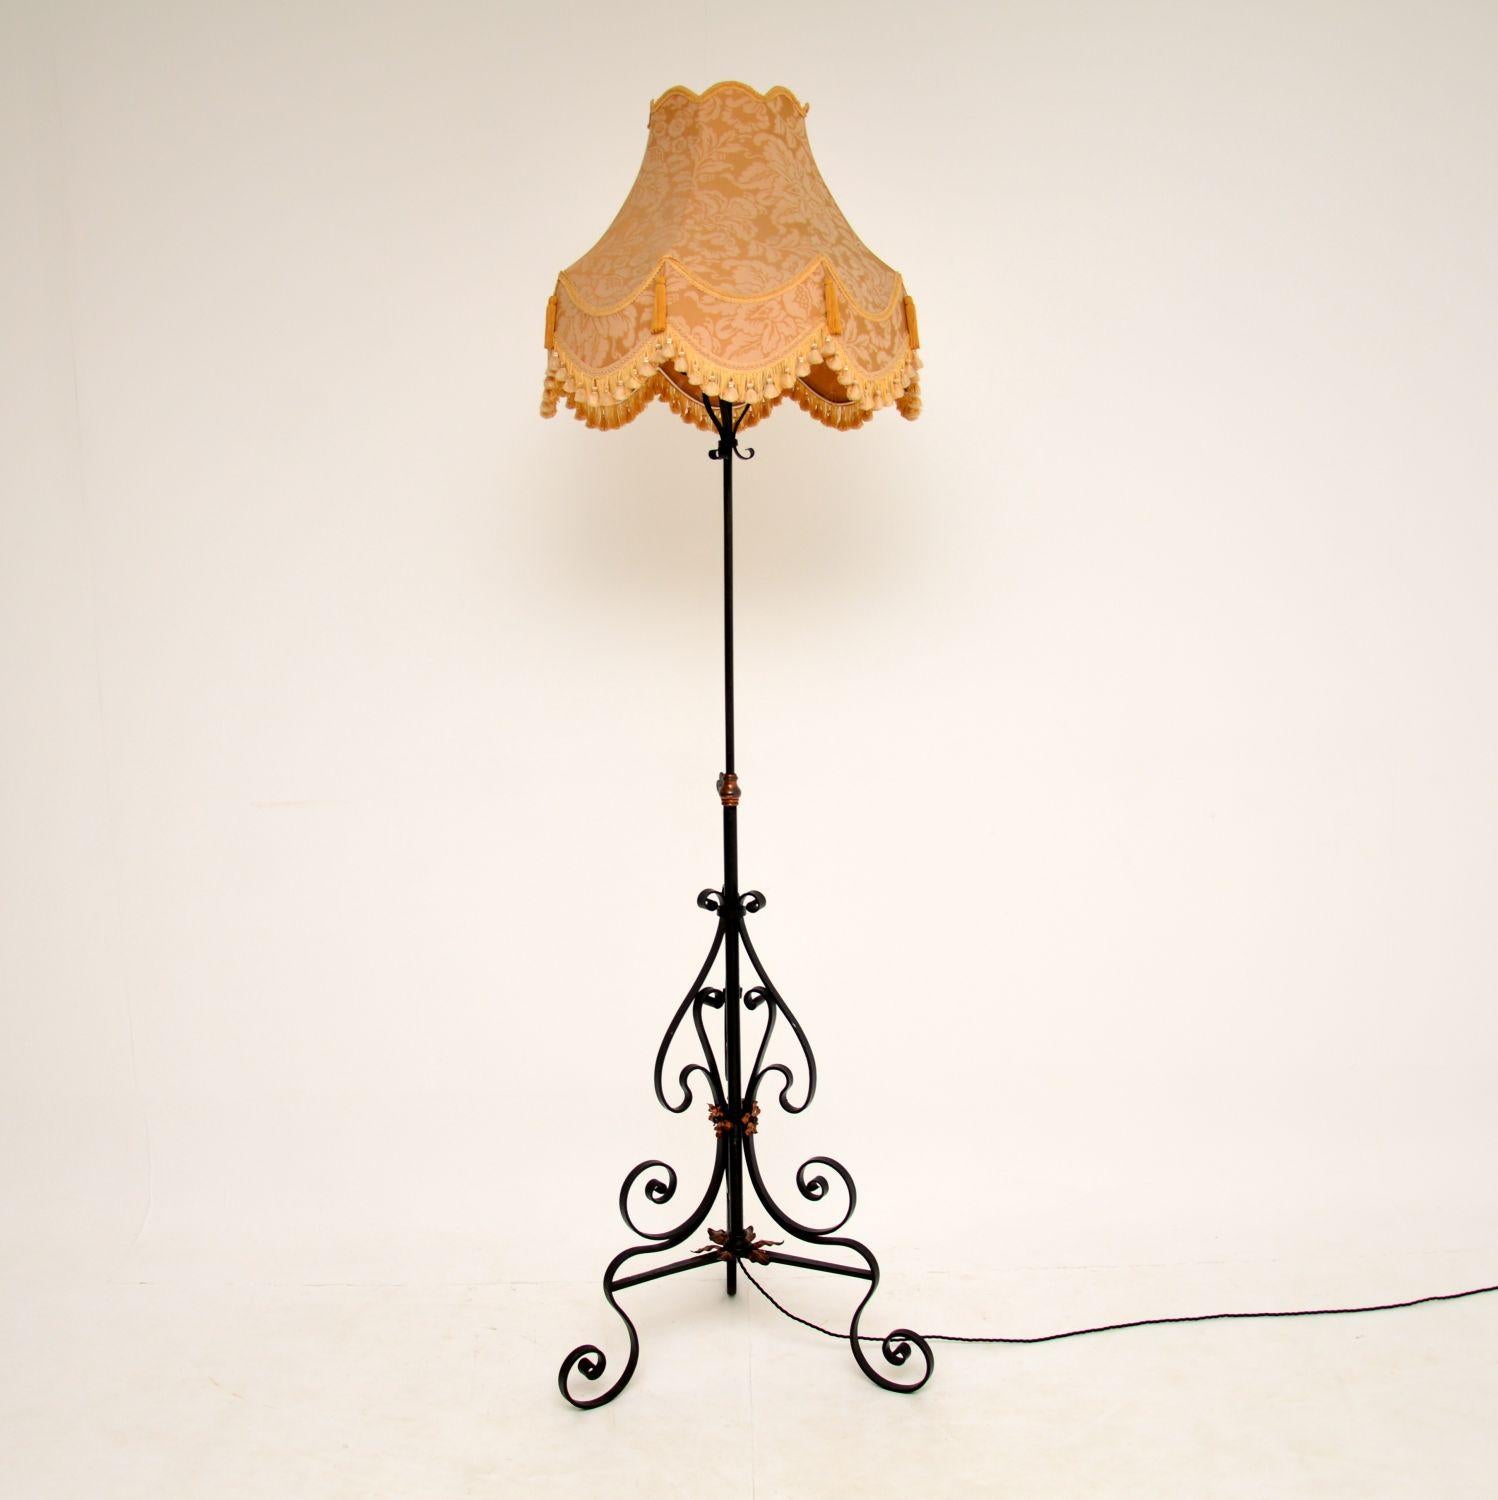 A stunning antique floor lamp, beautifully made from wrought iron with copper embellishments. This dates from the early 20th century, around 1900-1920.

It is of extremely fine quality, this has a rise and fall mechanism so the height can be